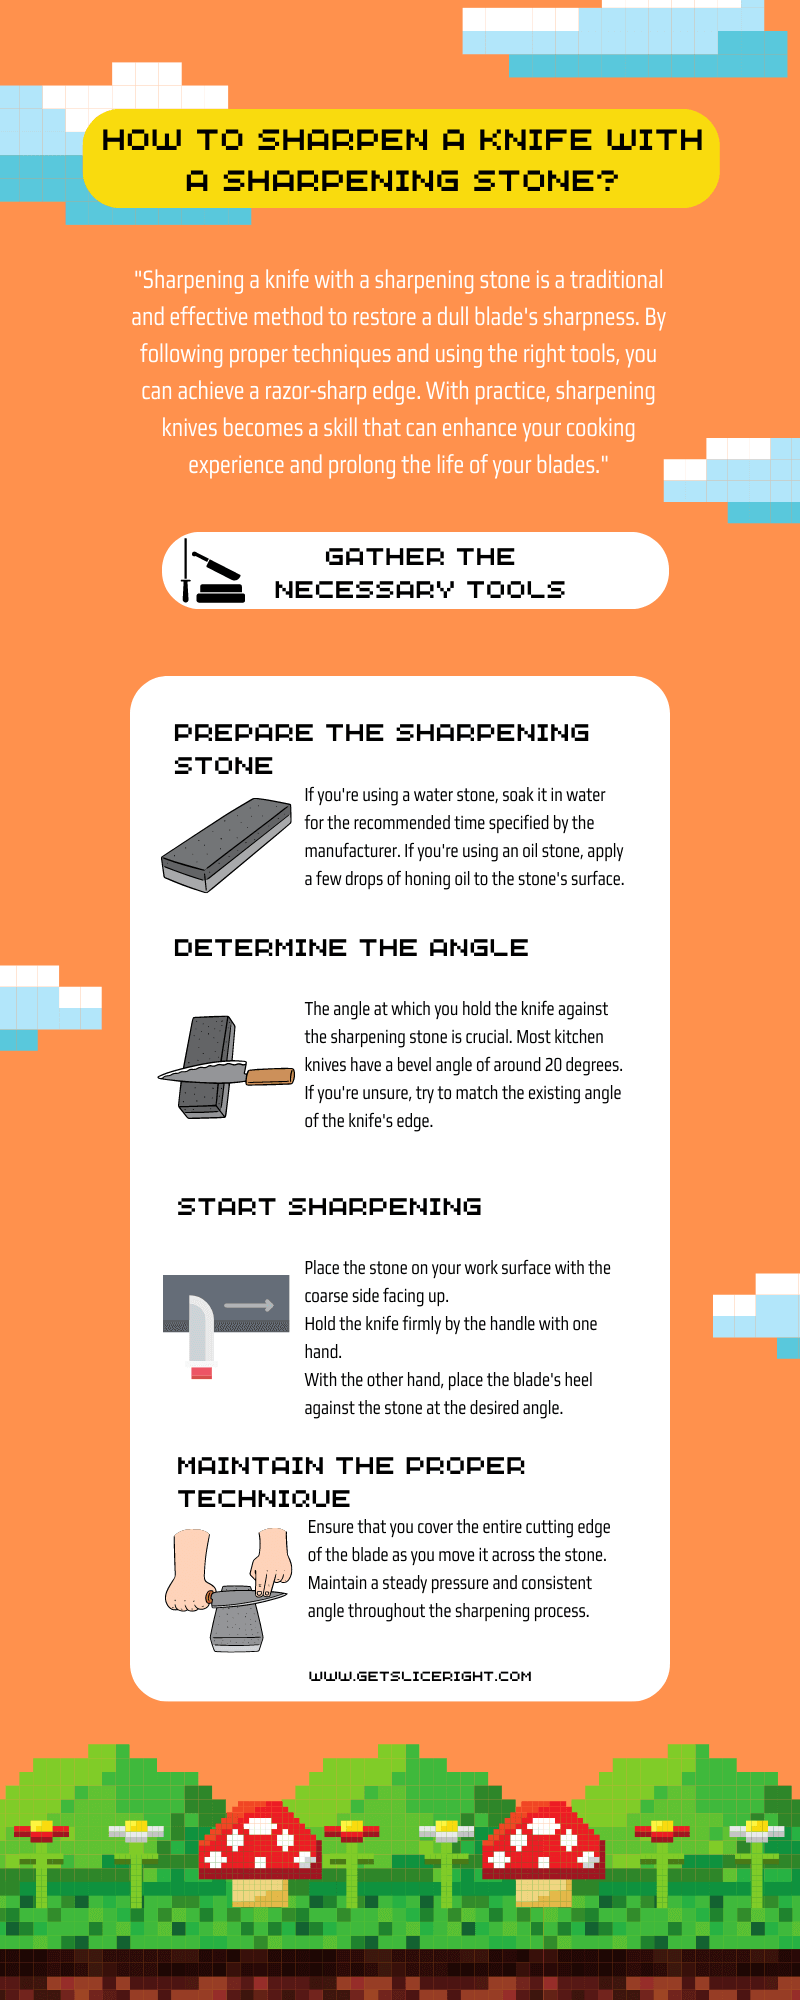 How To Sharpen A Knife With A Sharpening Stone - Infographics